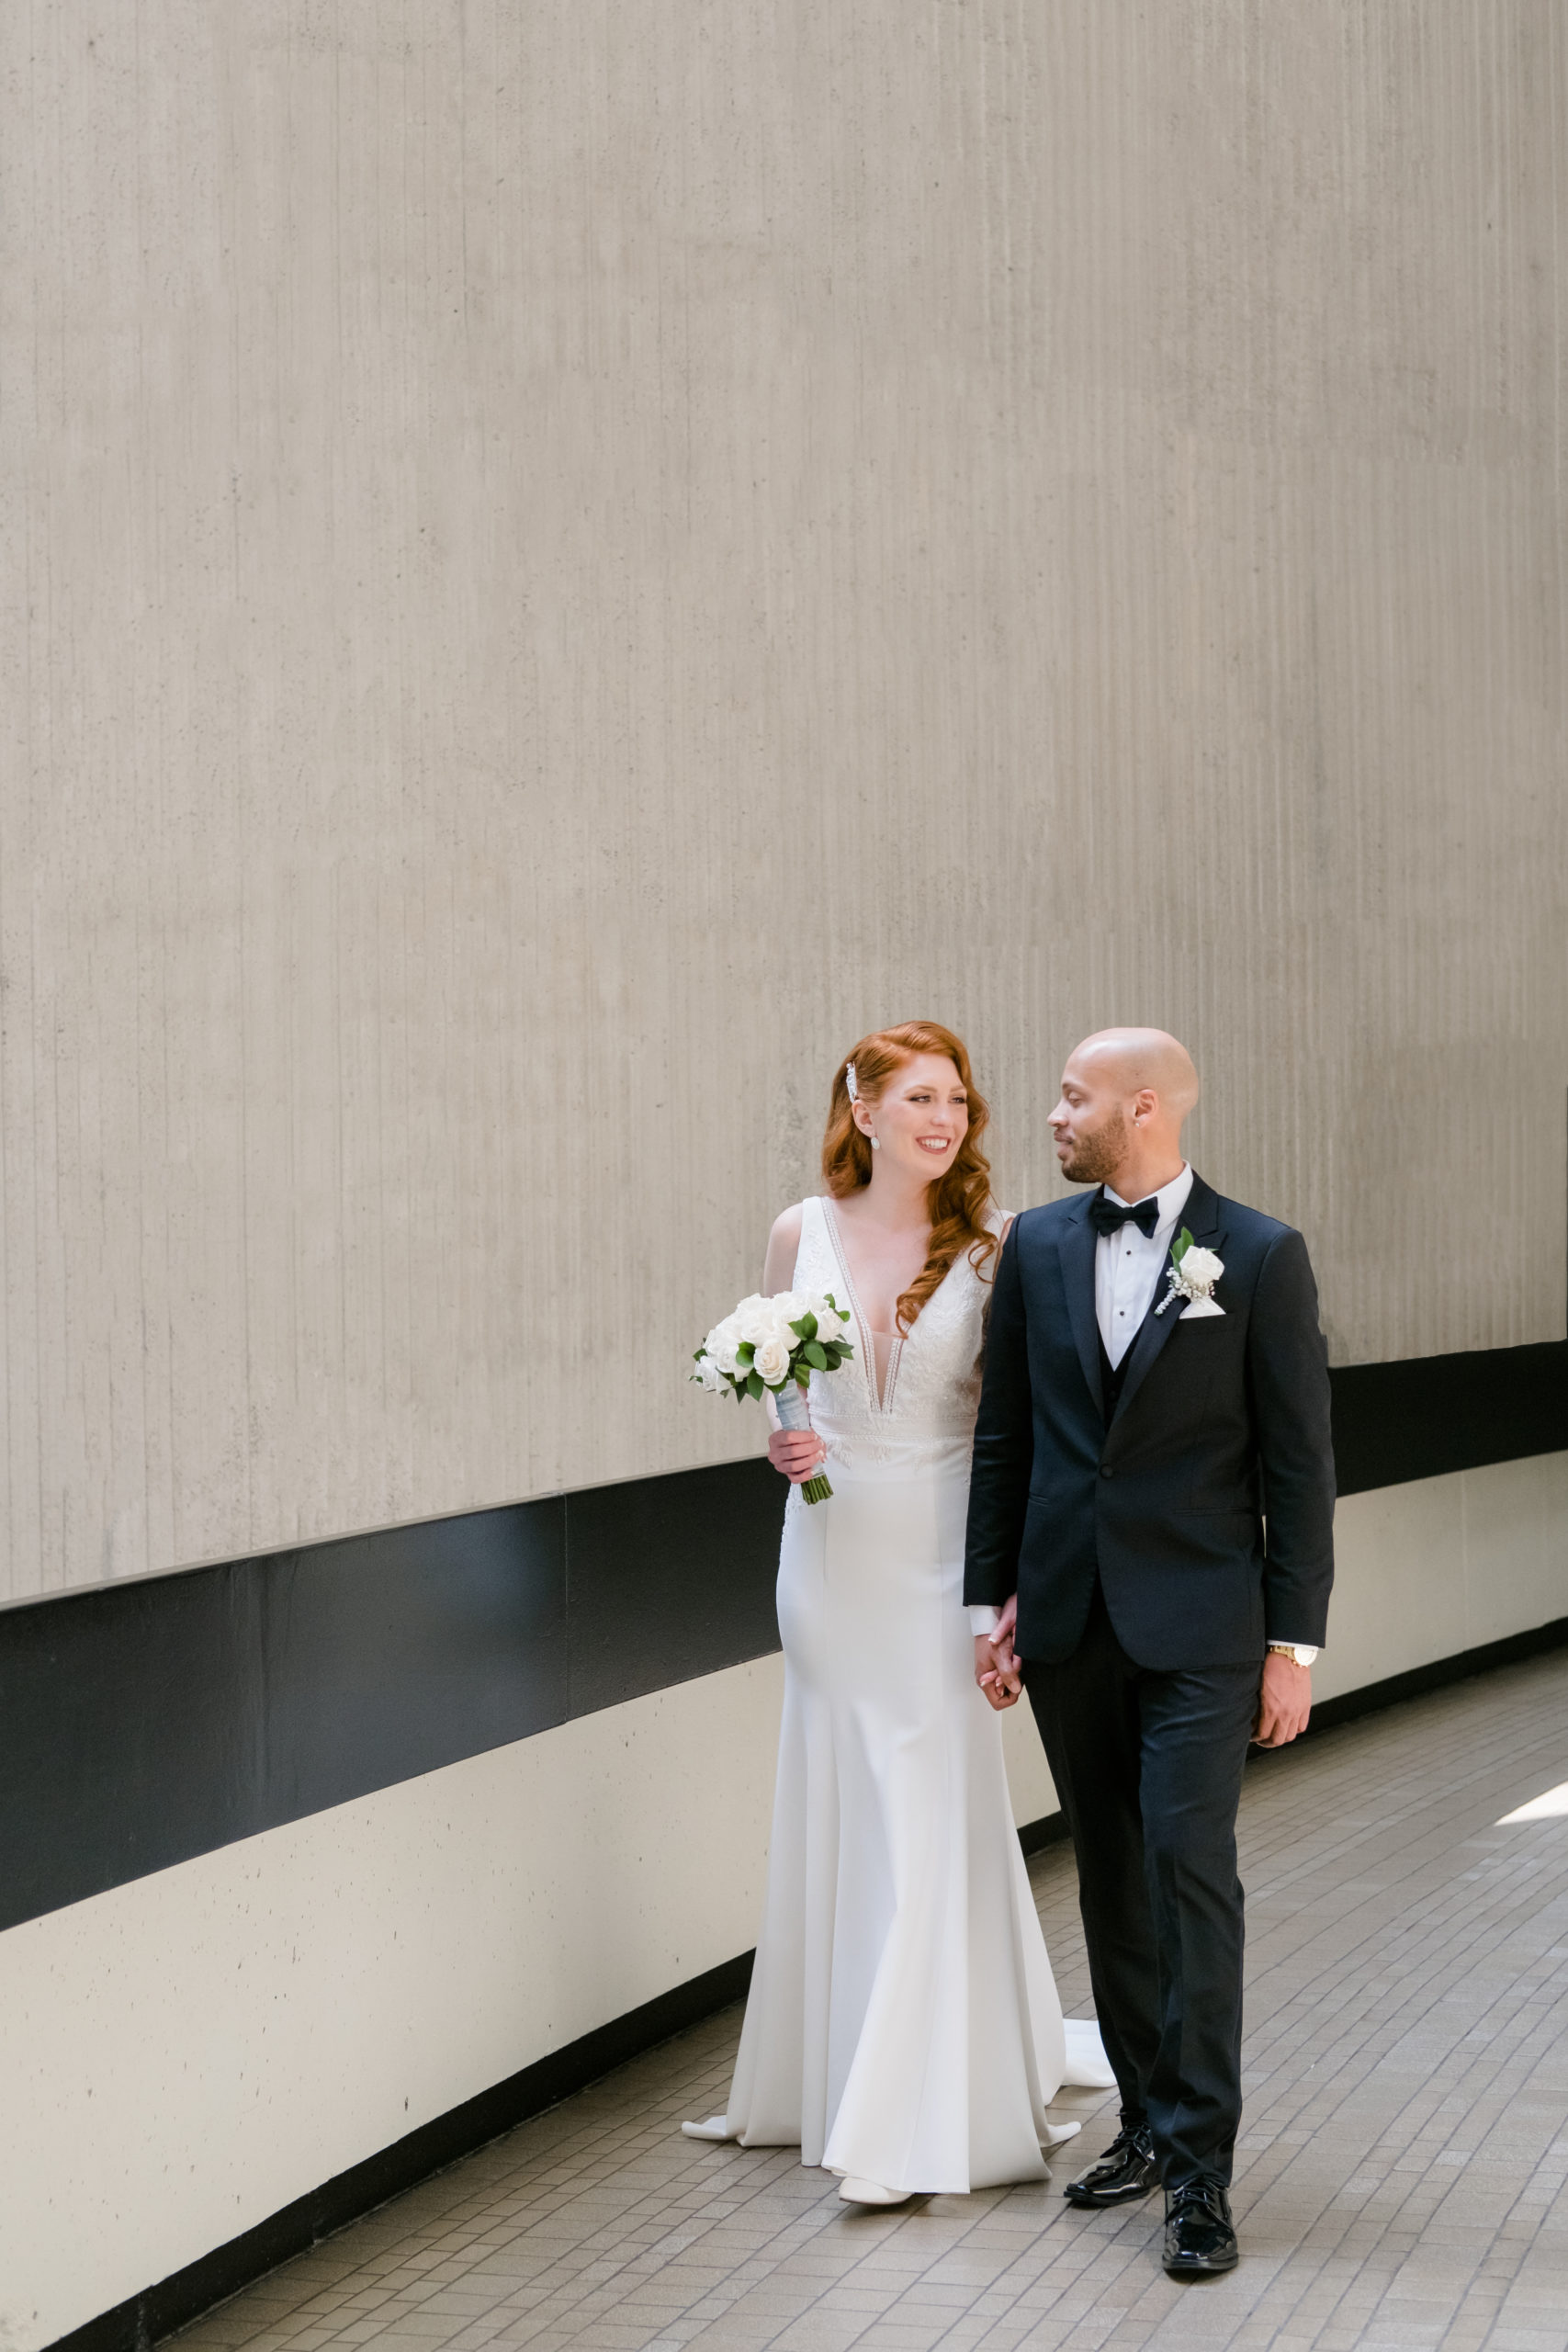 Couple's first look at Detroit Marriot in Renaissance Center